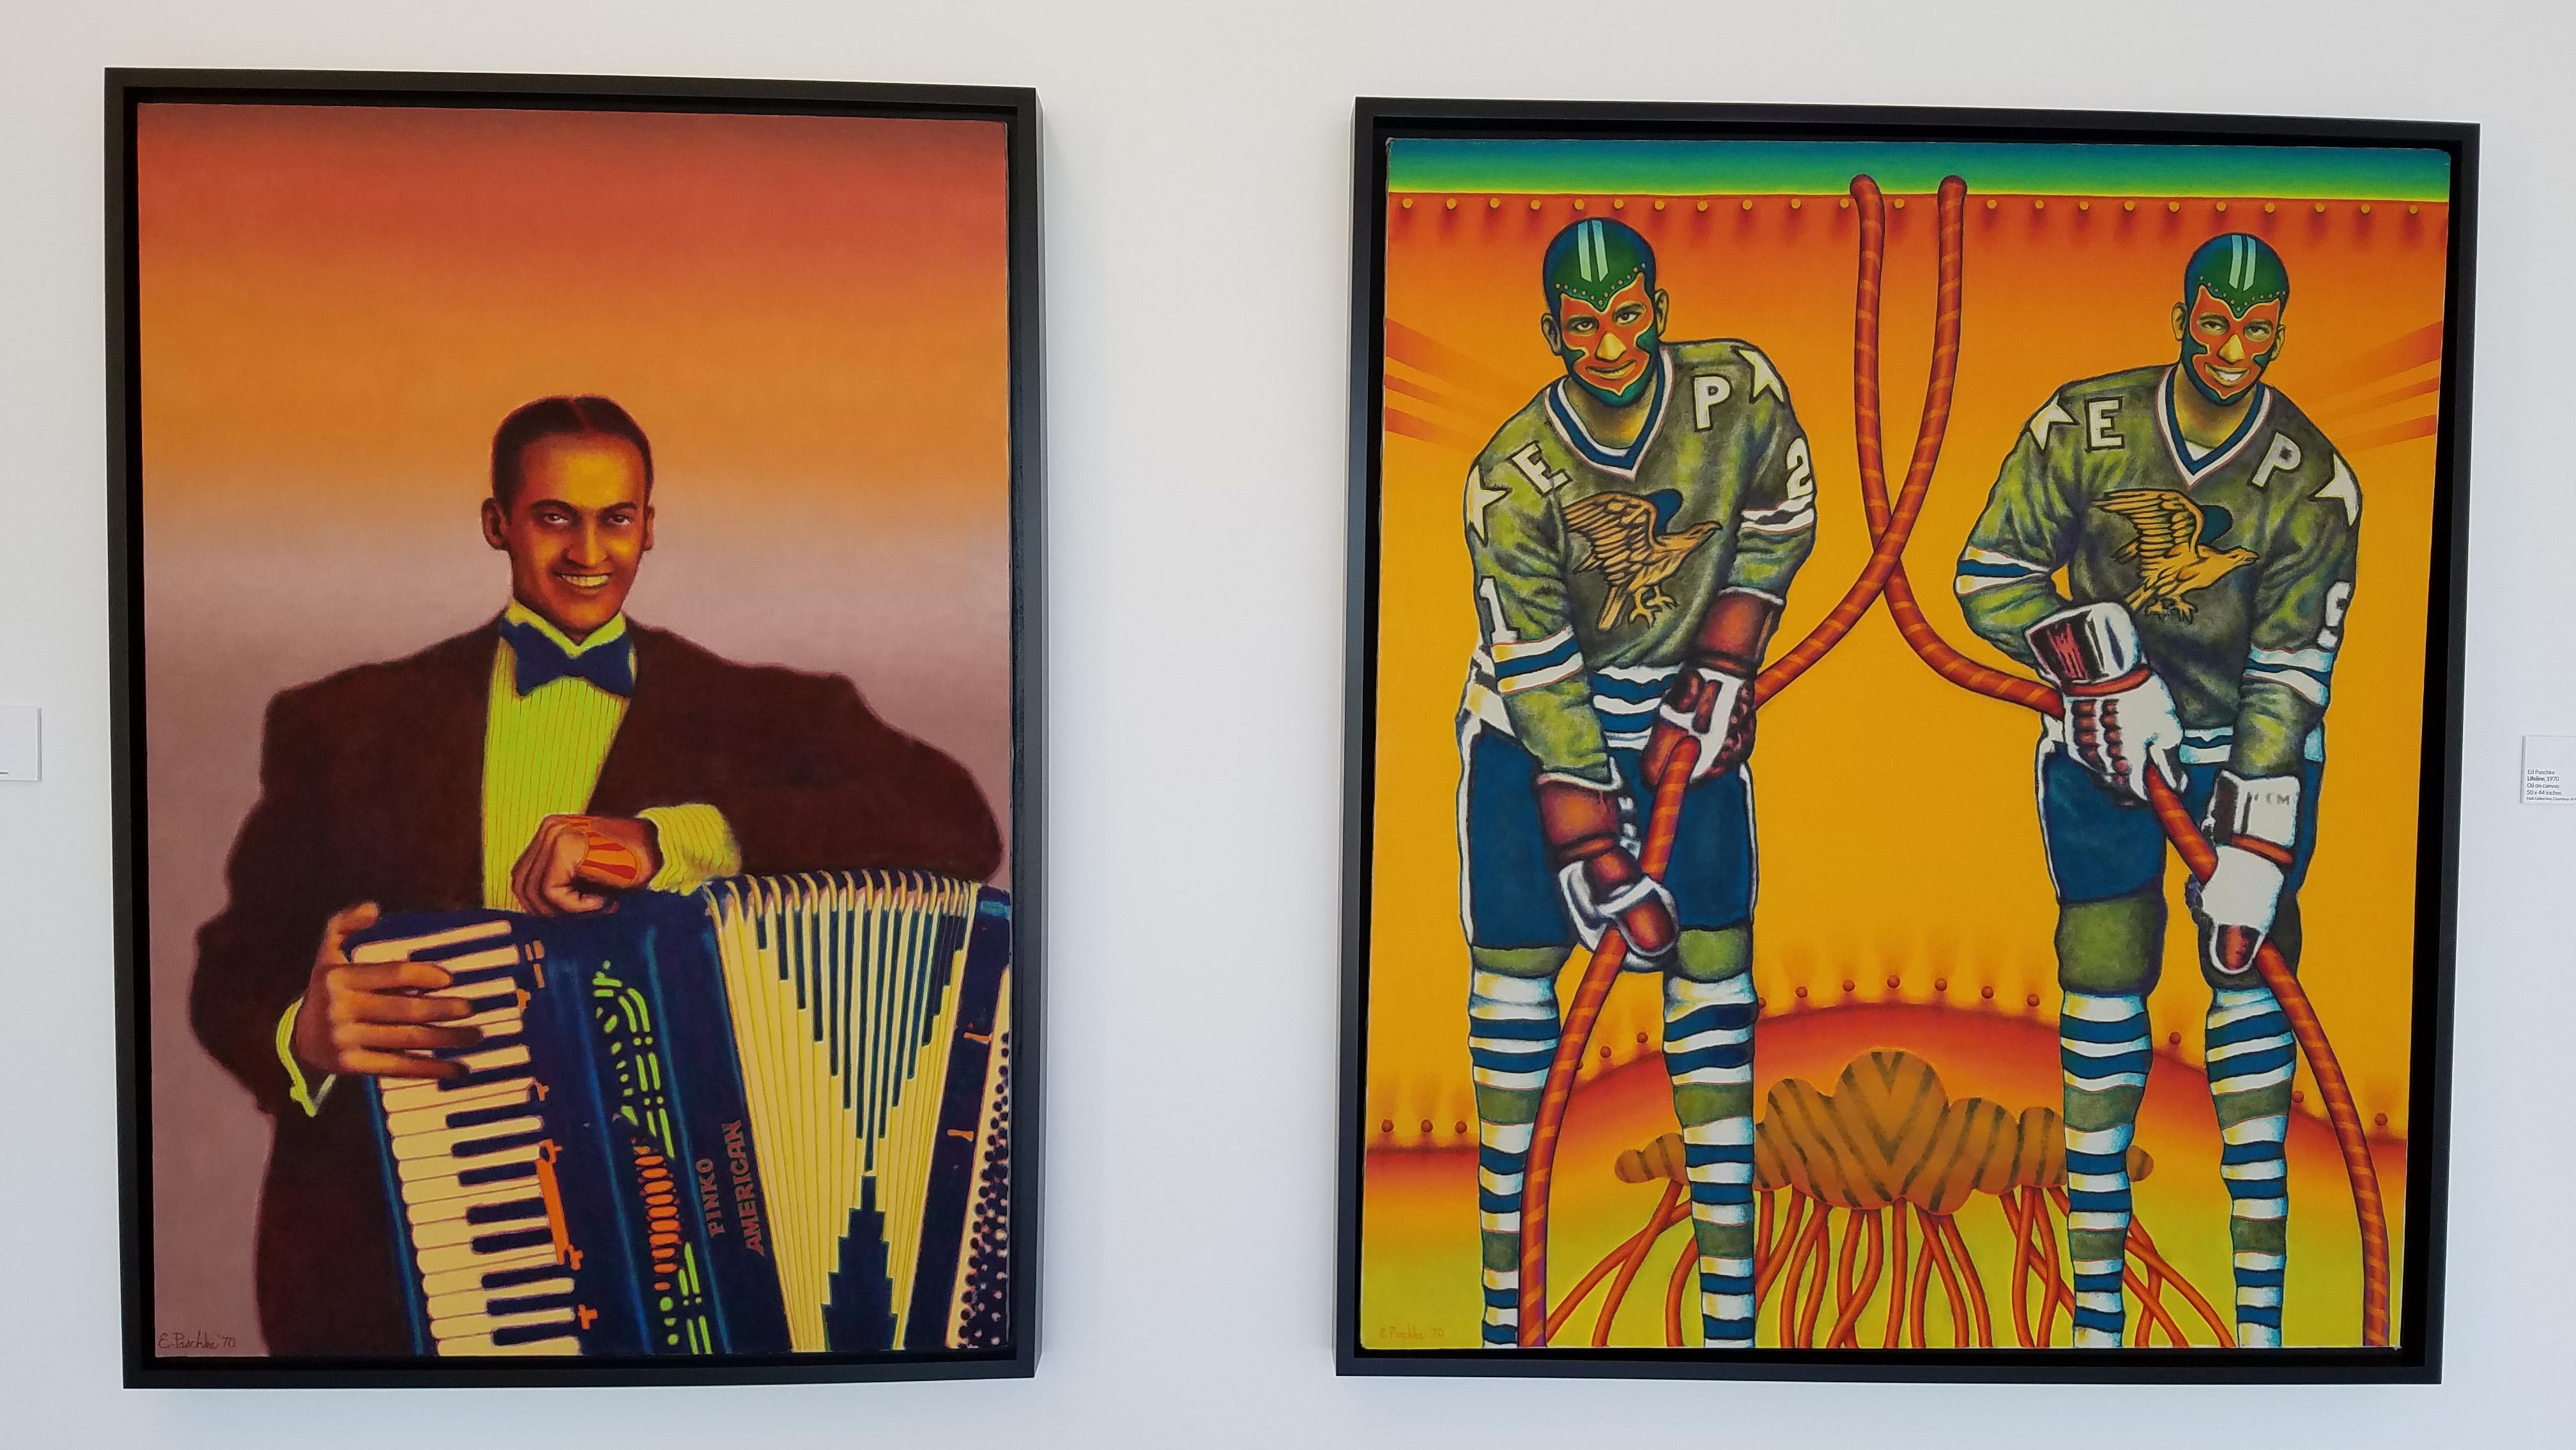 Two of the 19 pieces in the Ed Paschke exhibit currently on display. (Courtesy of Ed Paschke Art Center)